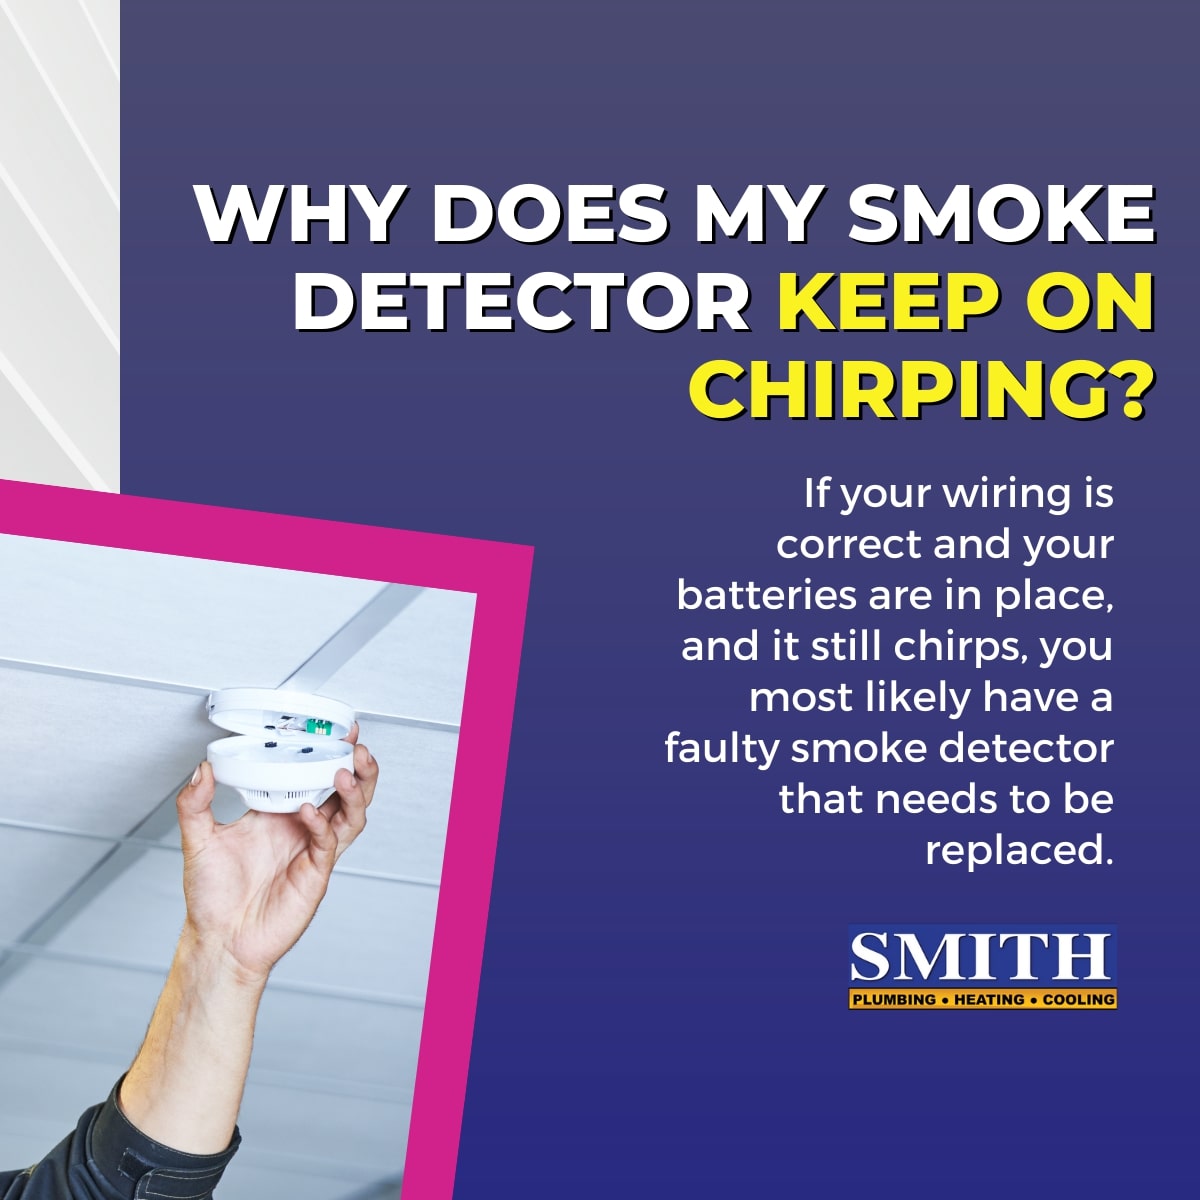 Why does my smoke detector keep on chirping?